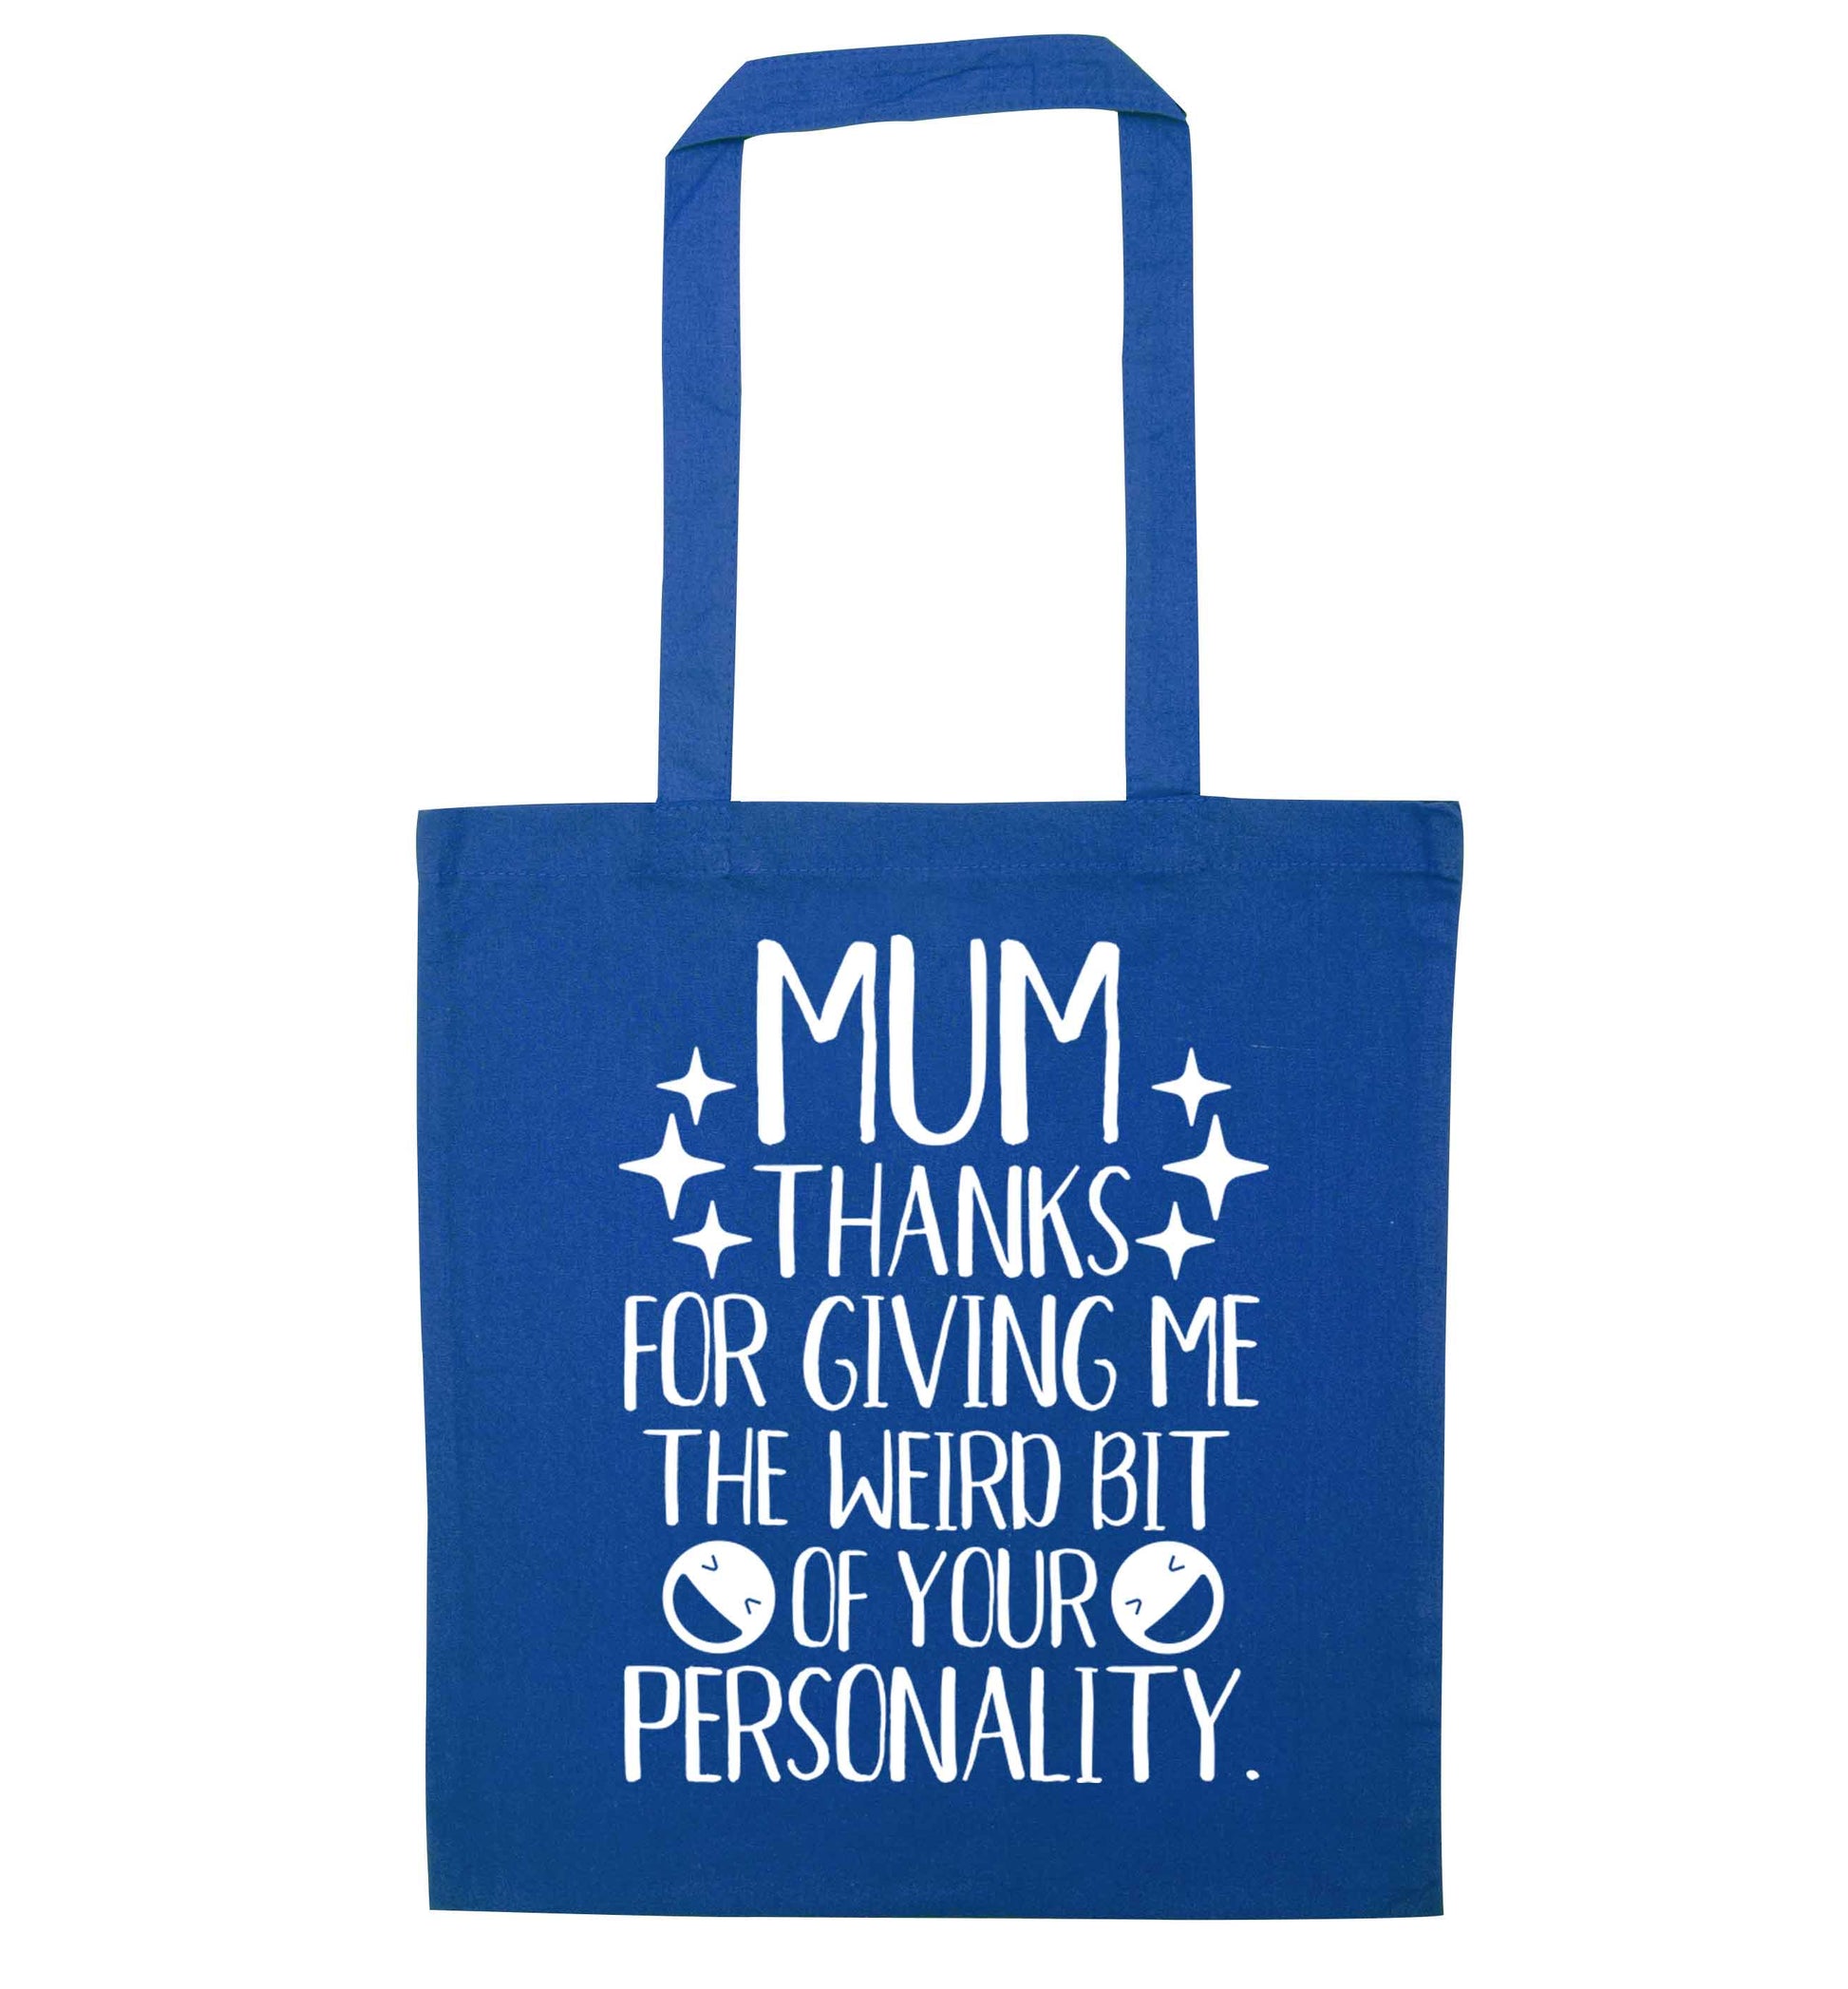 Mum thanks for giving me the weird bit of your personality blue tote bag